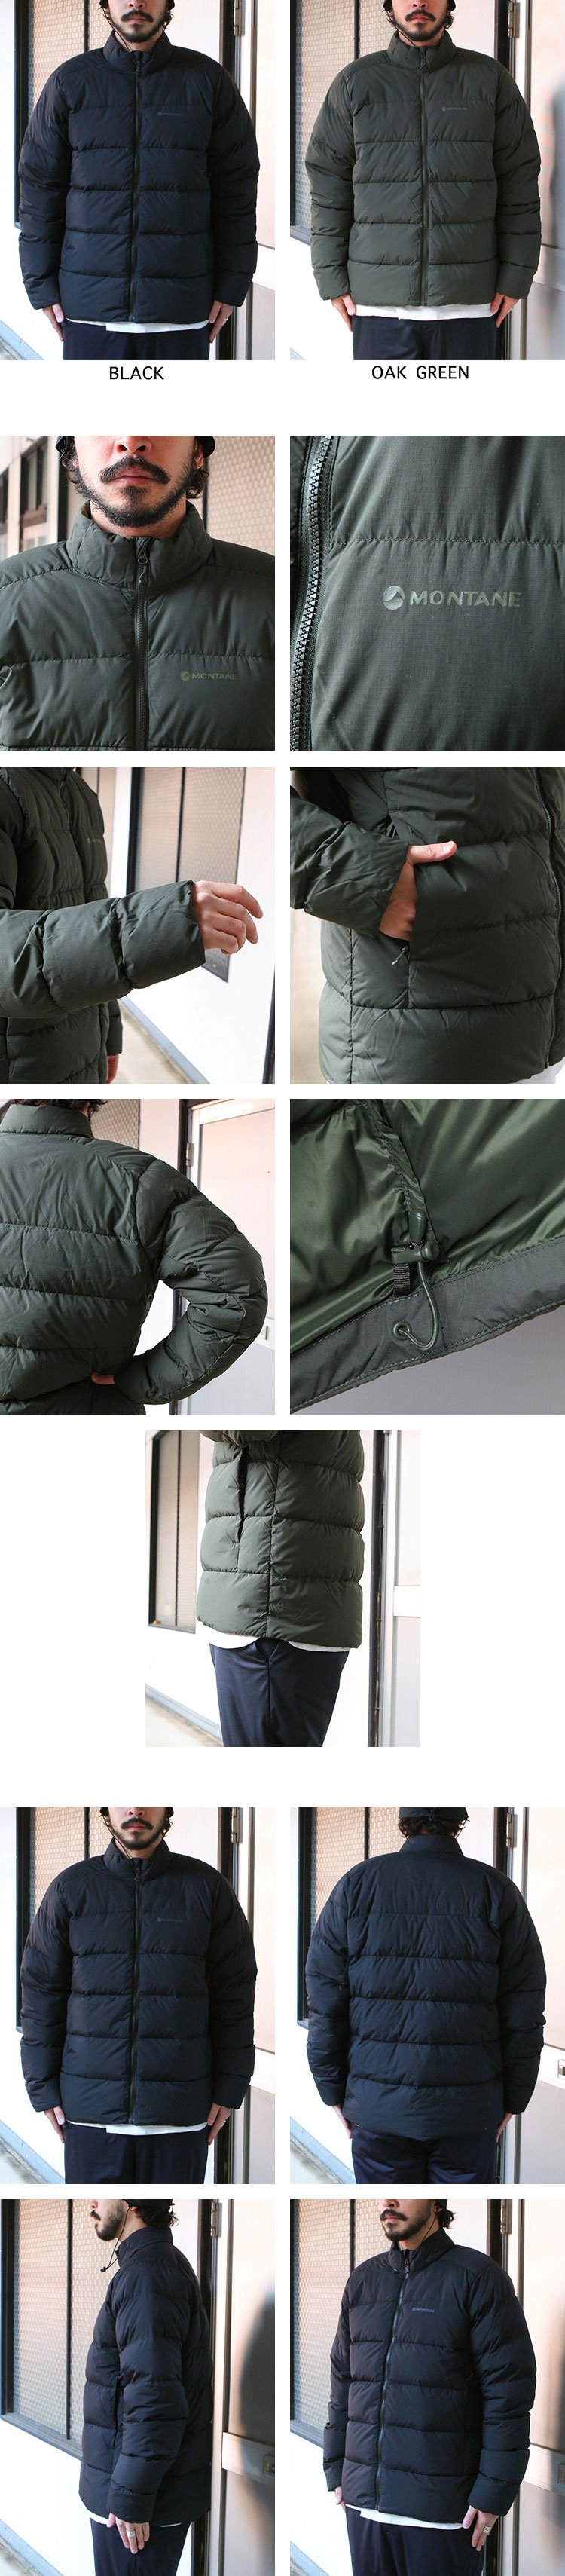 MONTANE TUNDRA JACKET | Brownfloor clothing Official Onlineshop